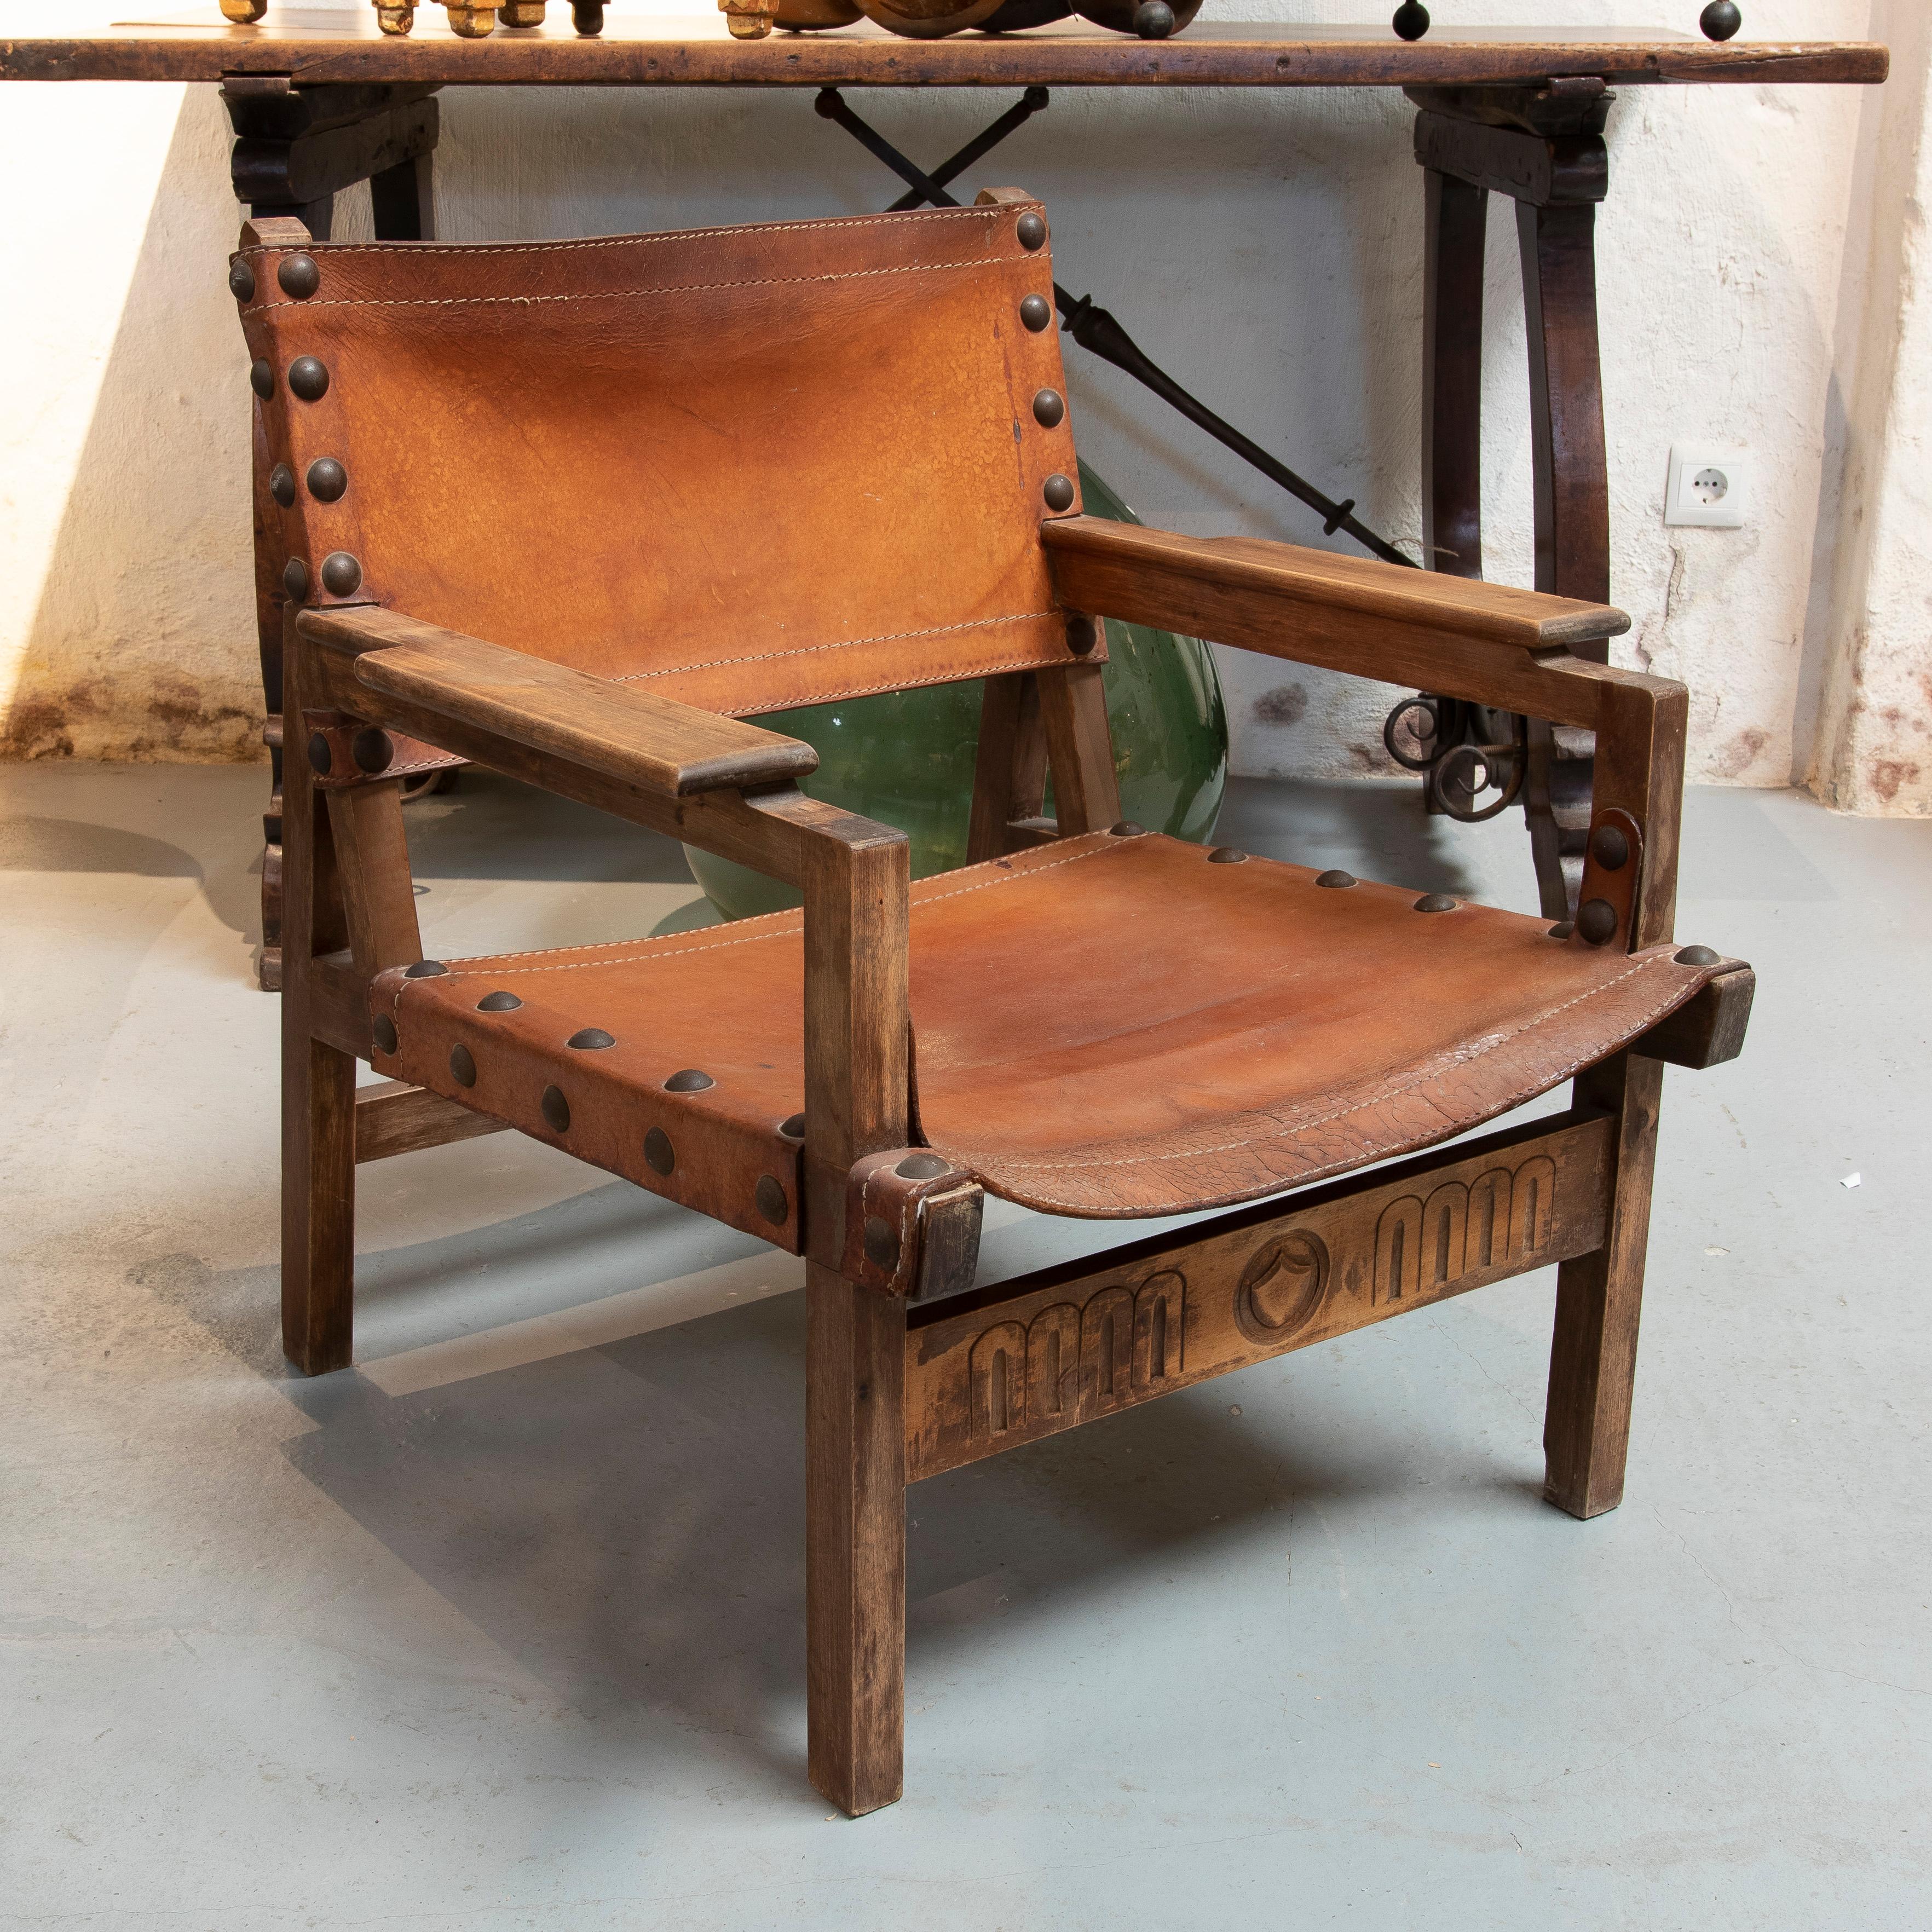 Pair of original 1970s designer chairs by Spaniard Paco Muñoz, founder of Darro Furniture in 1959, an effort of Spanish design to break the isolation faced by Franco's regime. 

 